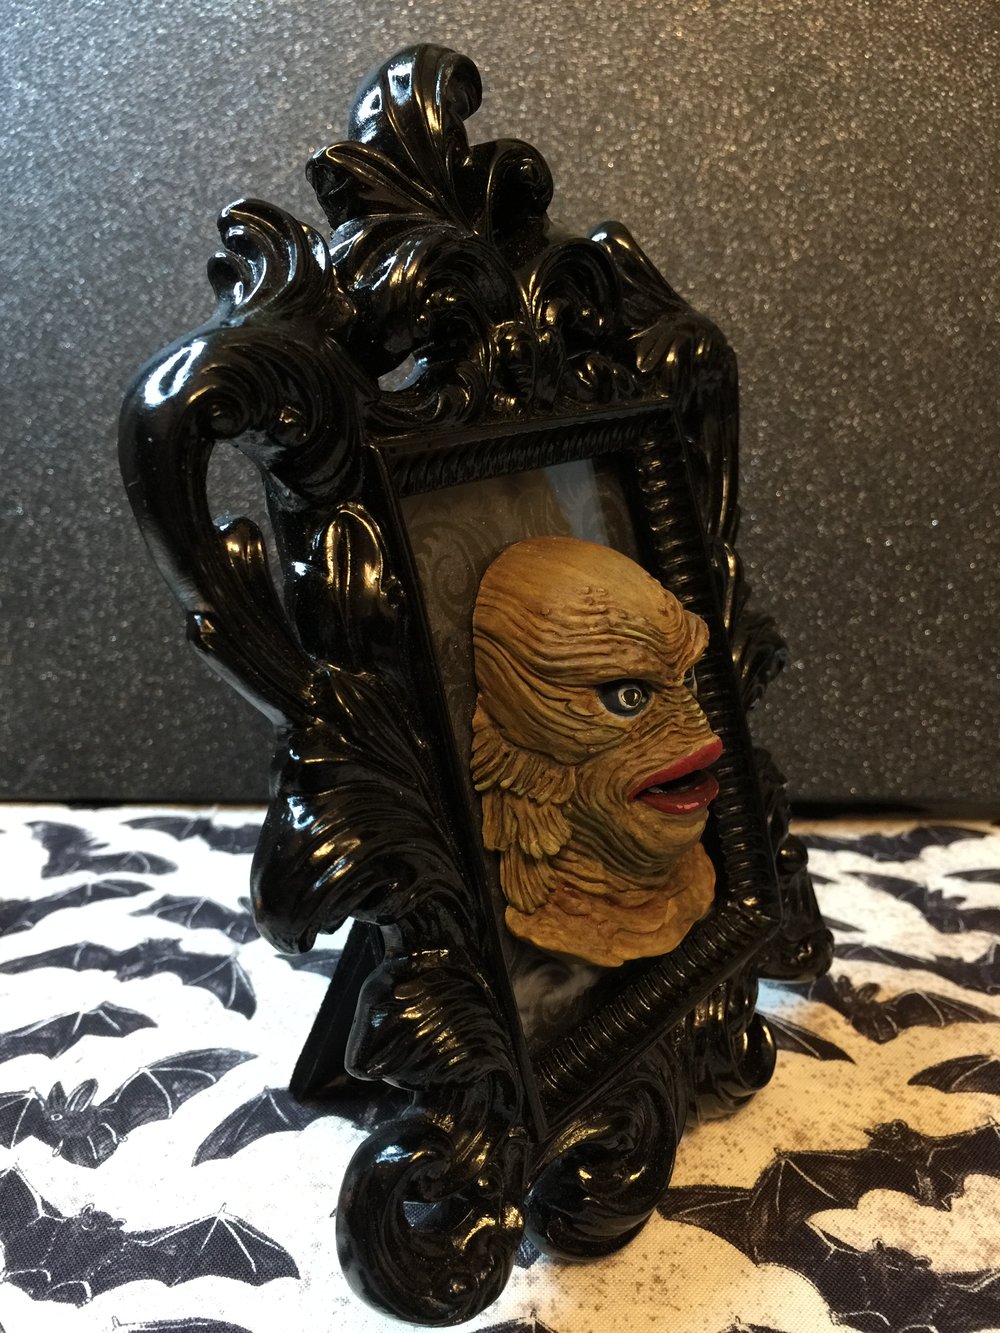 The Creature of the Black Lagoon Framed Art 